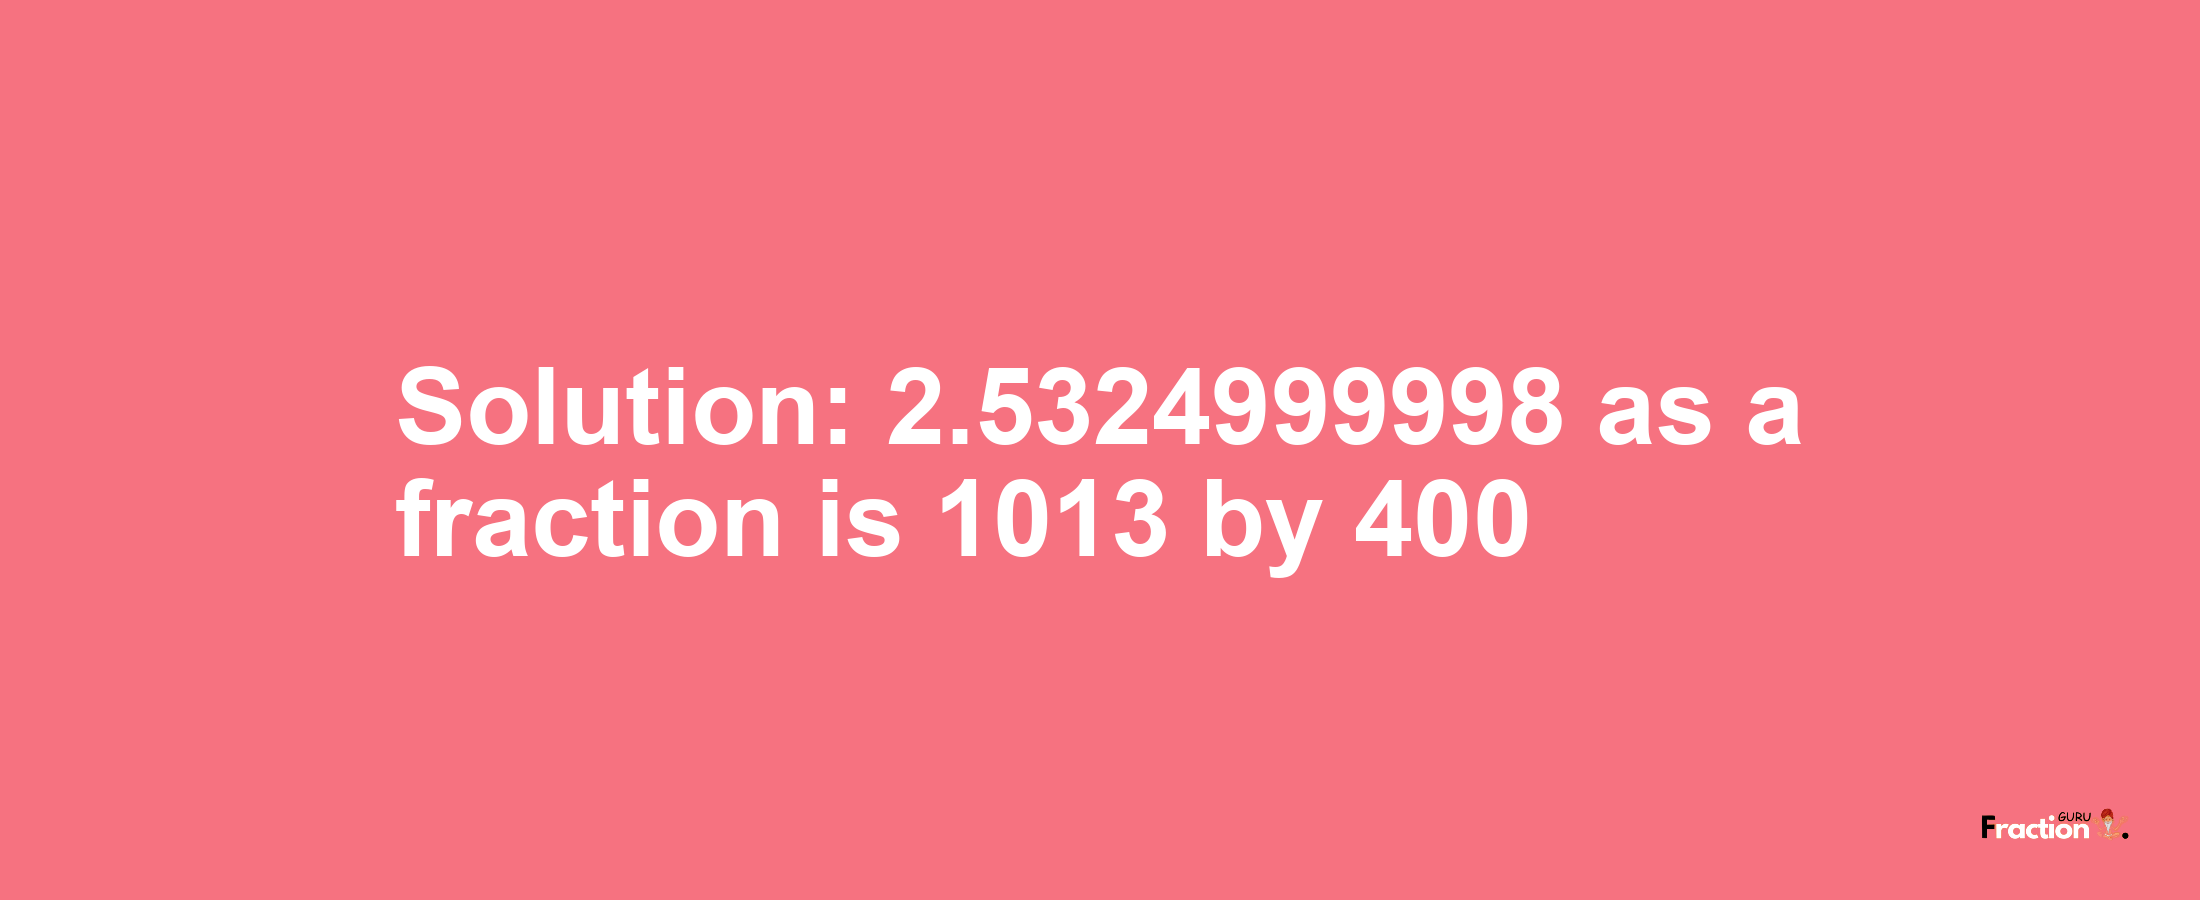 Solution:2.5324999998 as a fraction is 1013/400